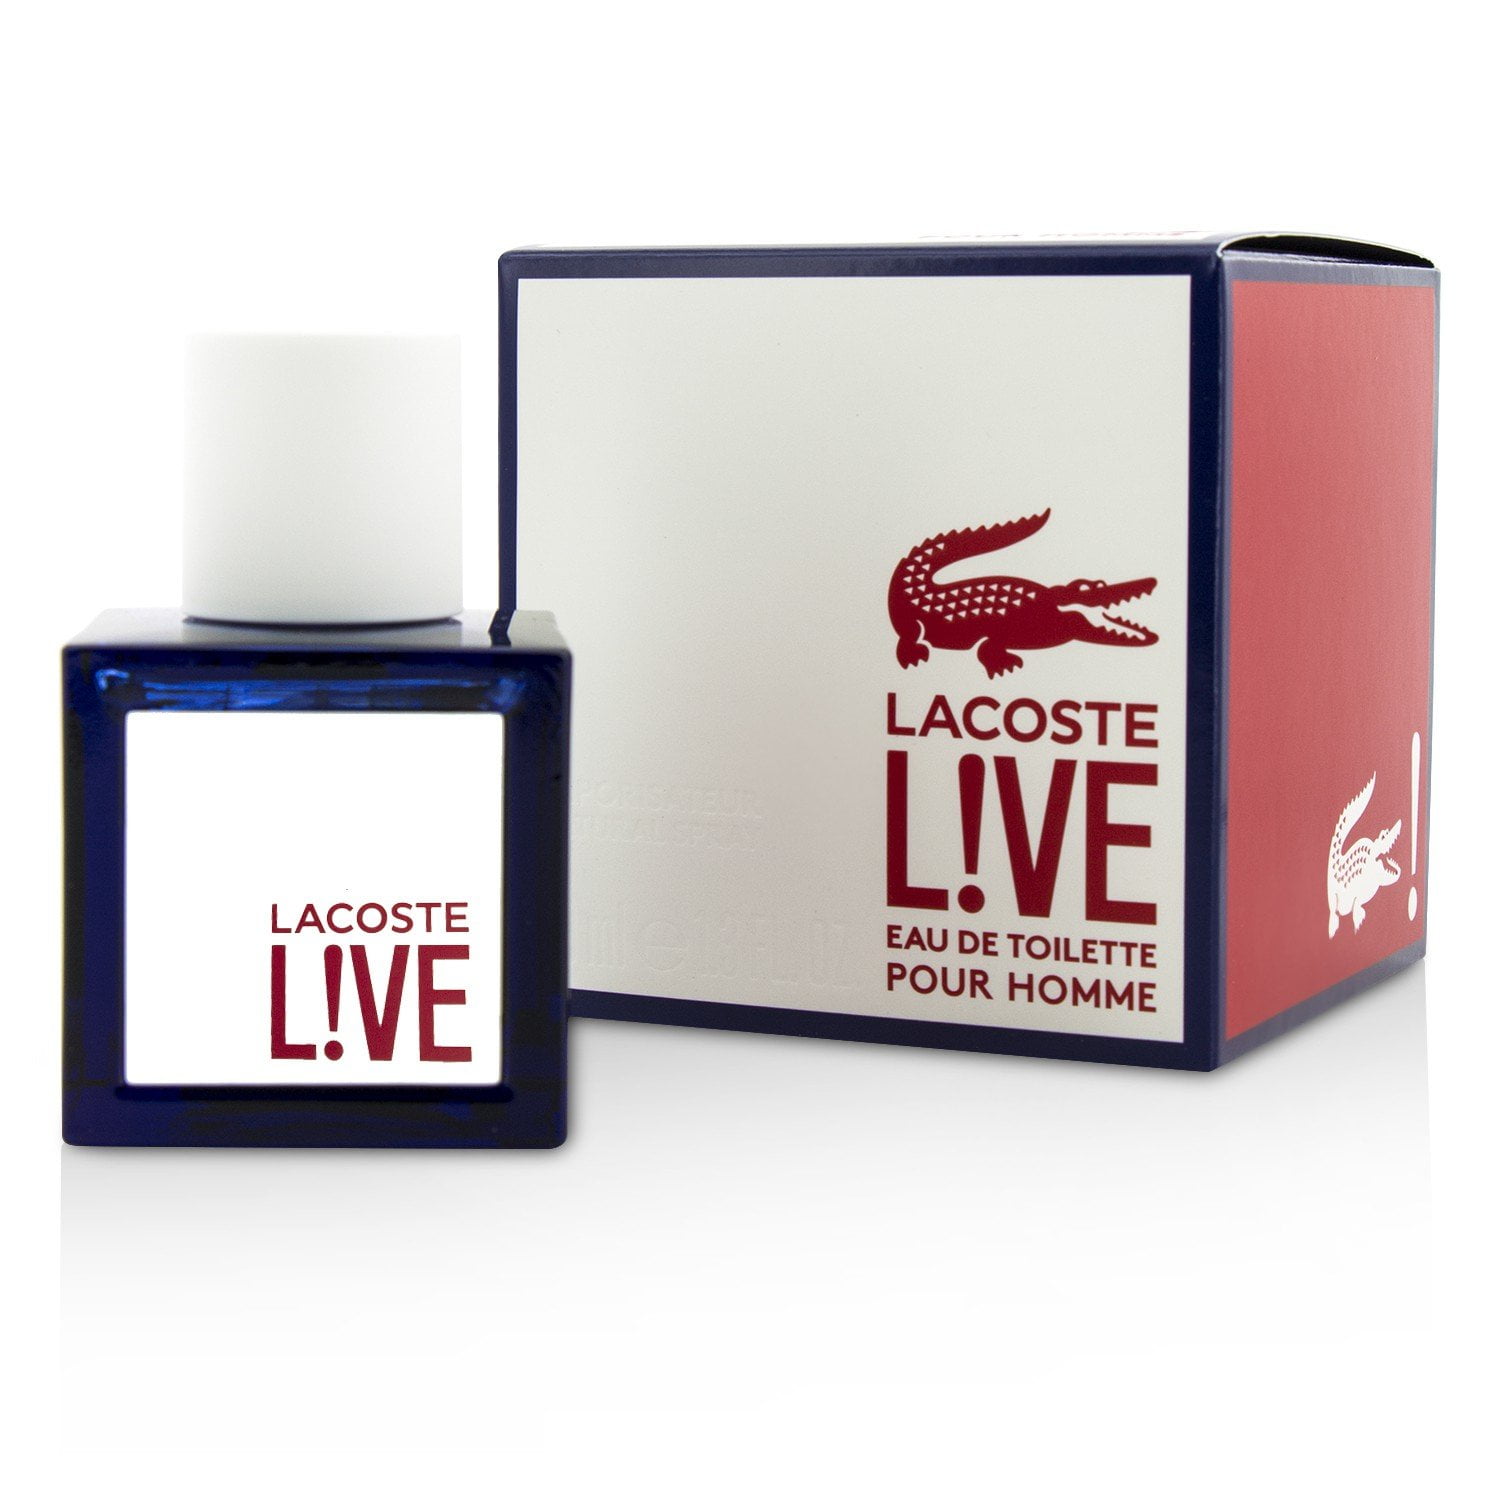 Lacoste Live by Lacoste for Men - 1.3 oz EDT Spray